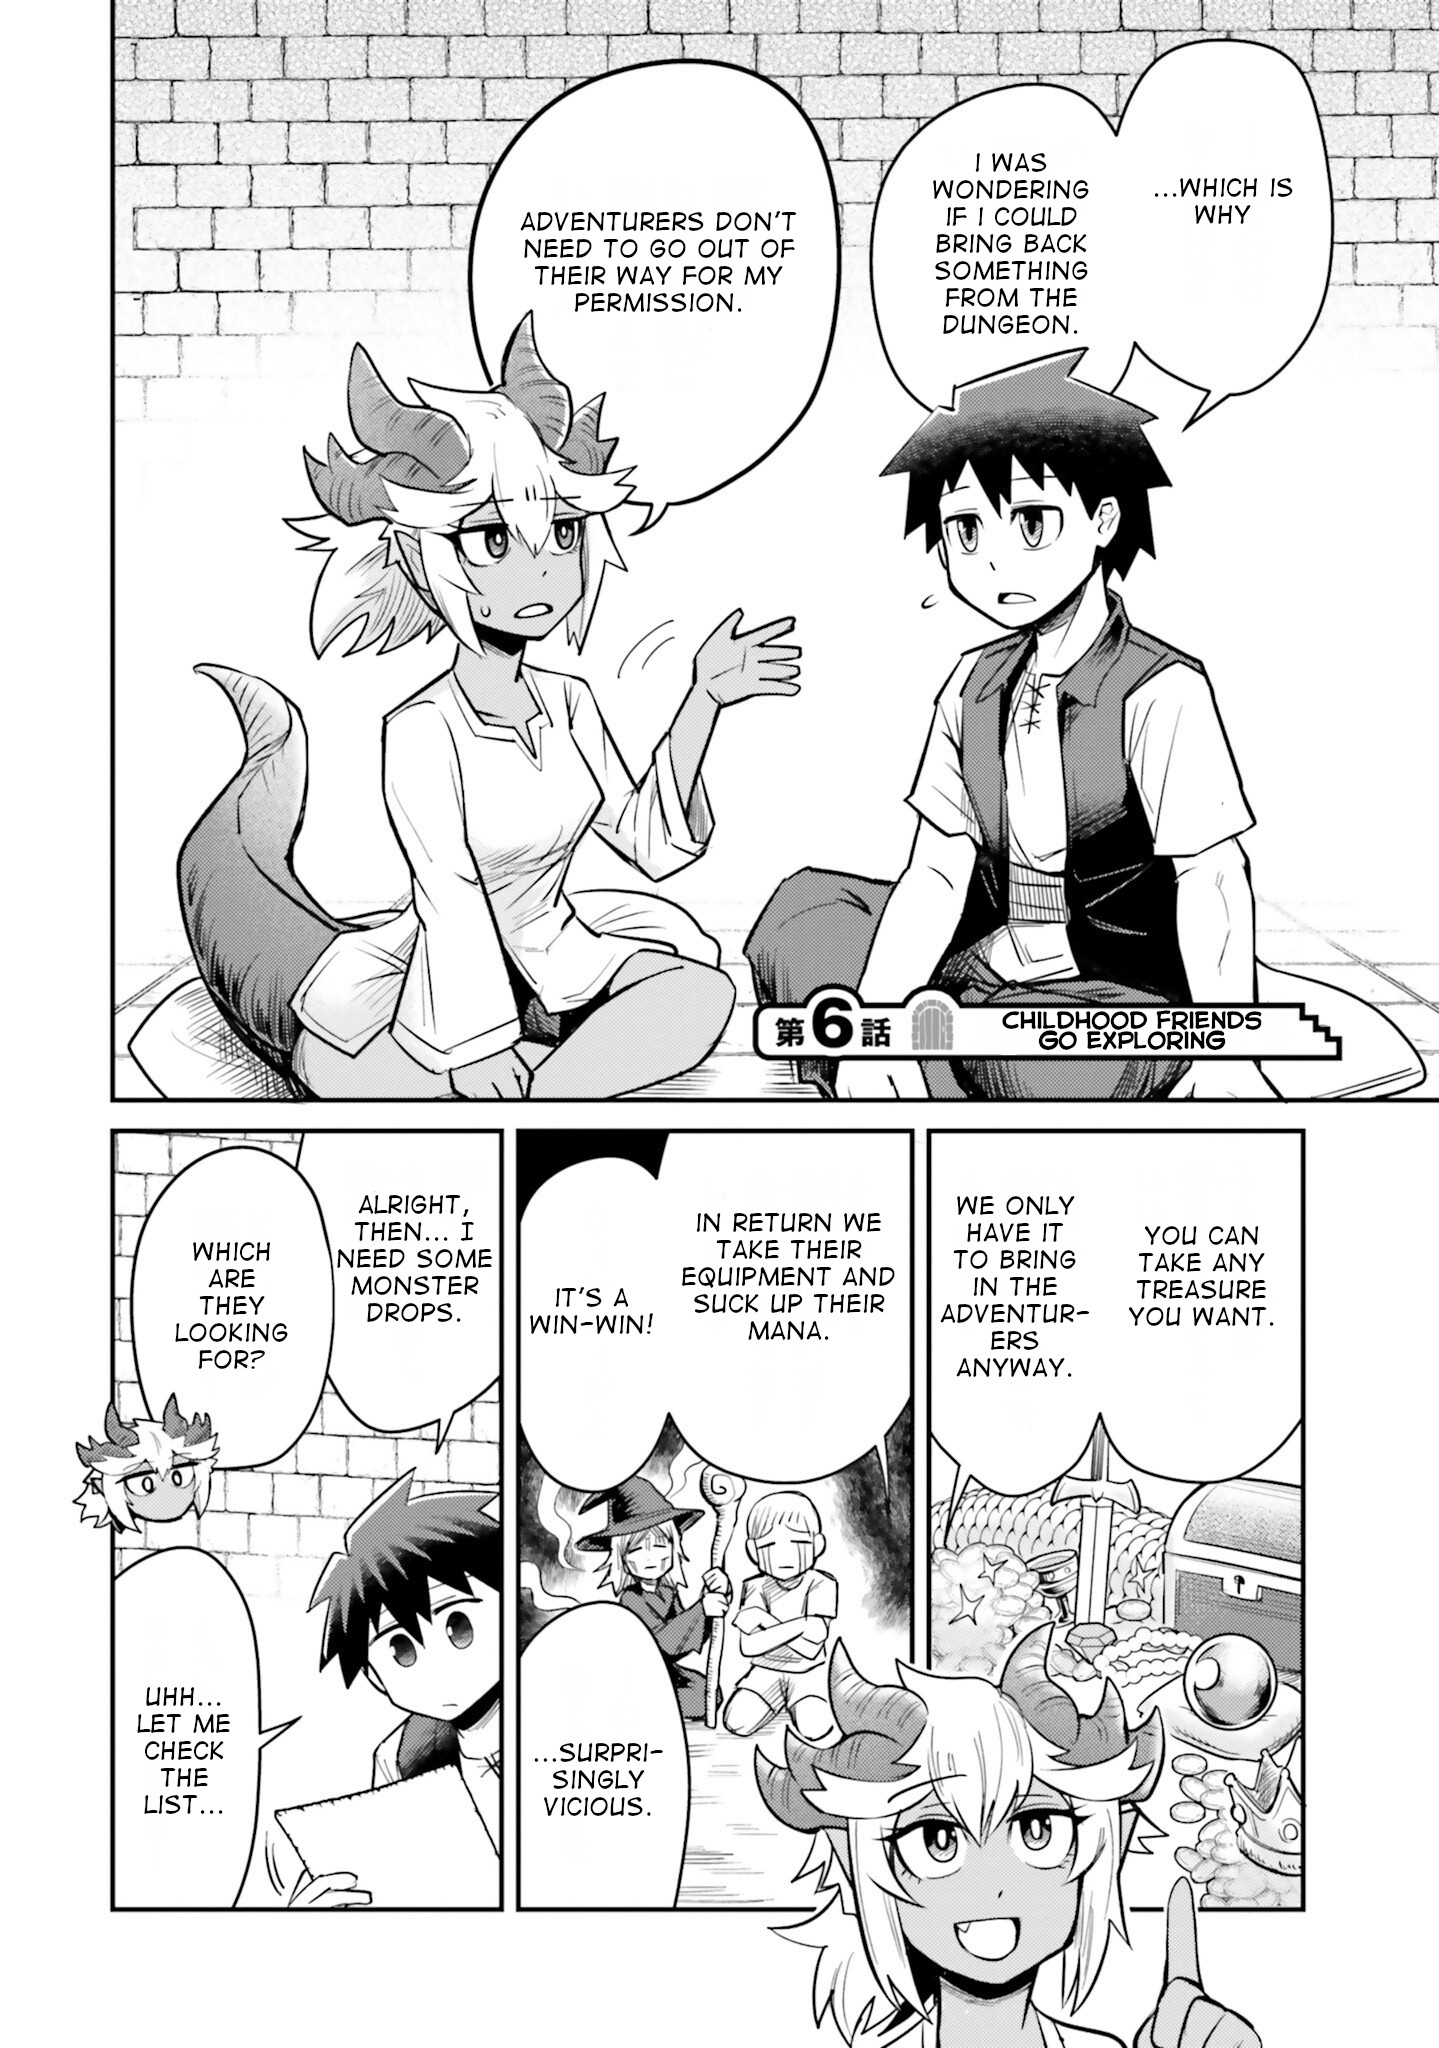 Dungeon No Osananajimi Vol.1 Chapter 6: Childhood Friends Go Exploring. - Picture 2